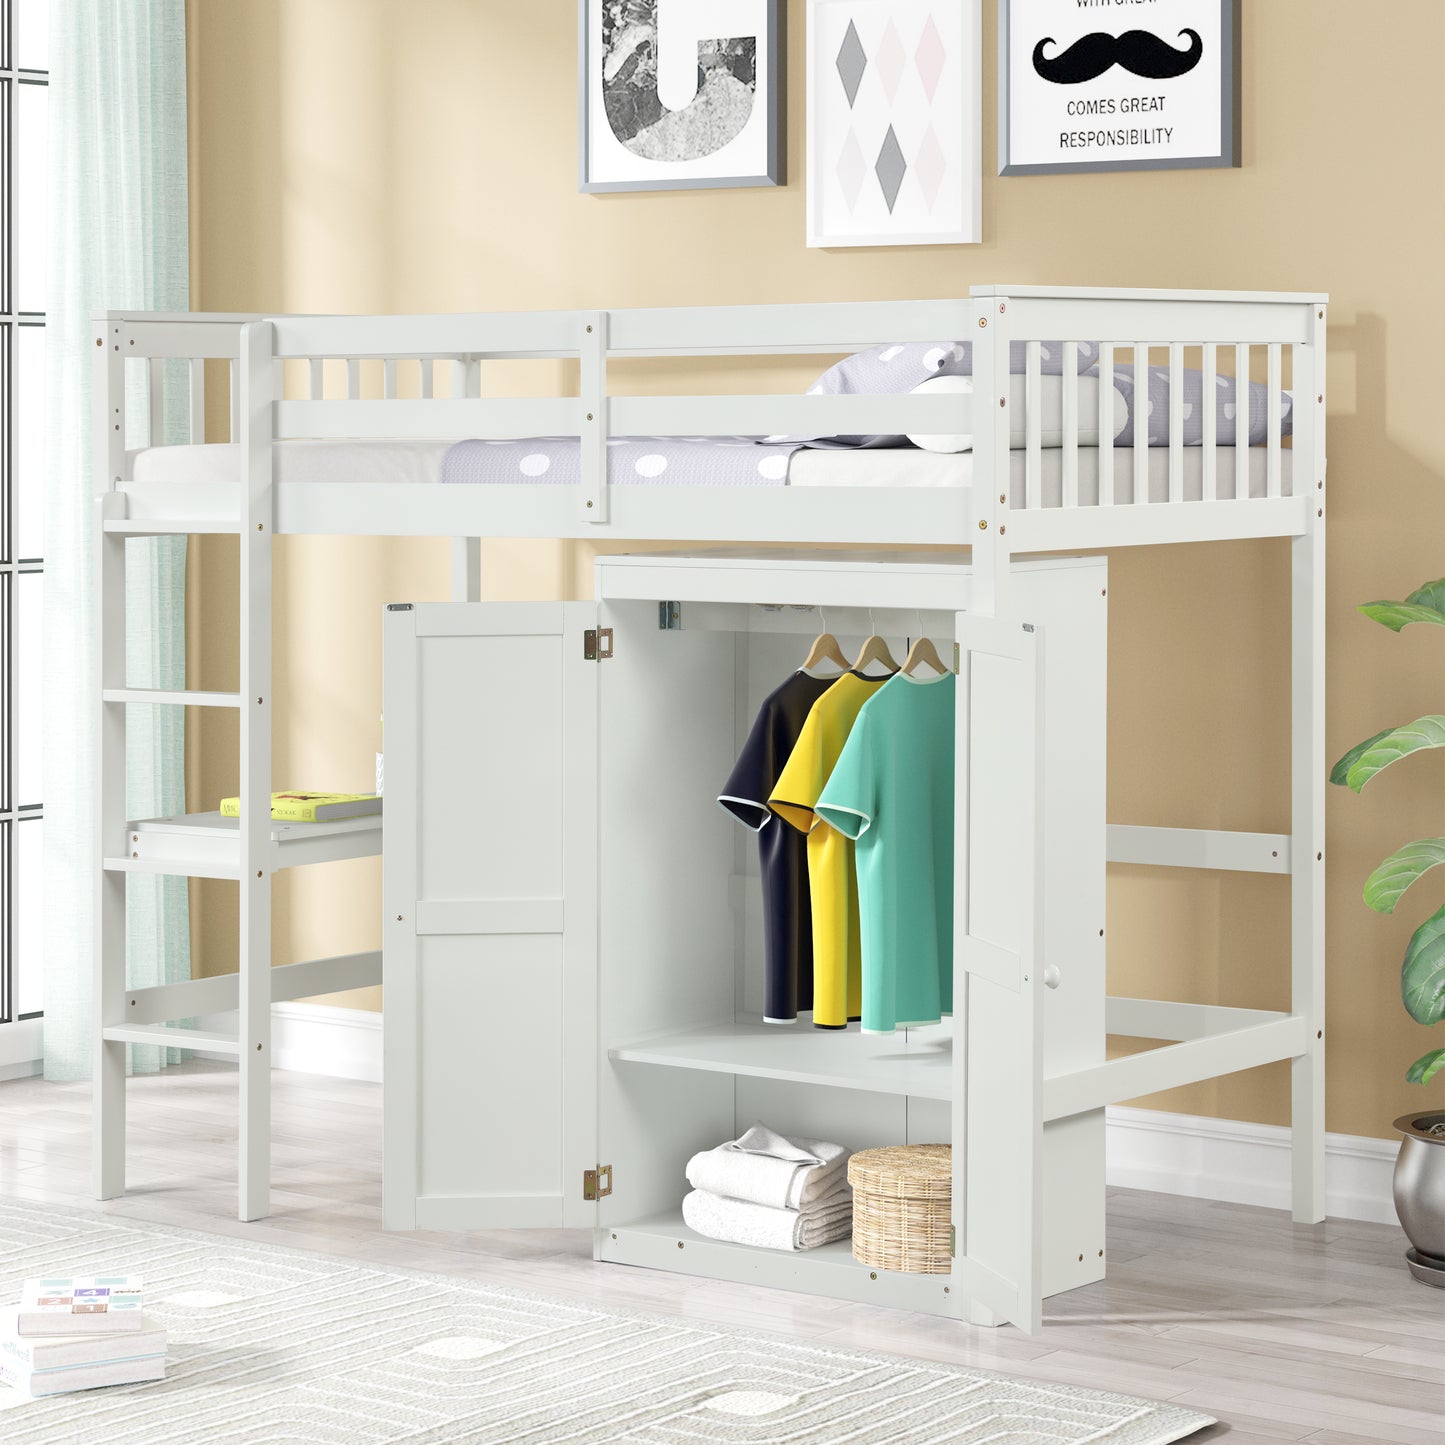 TWIN LOFT BED WITH DESK AND WARDROBE FOR WHITE COLOR